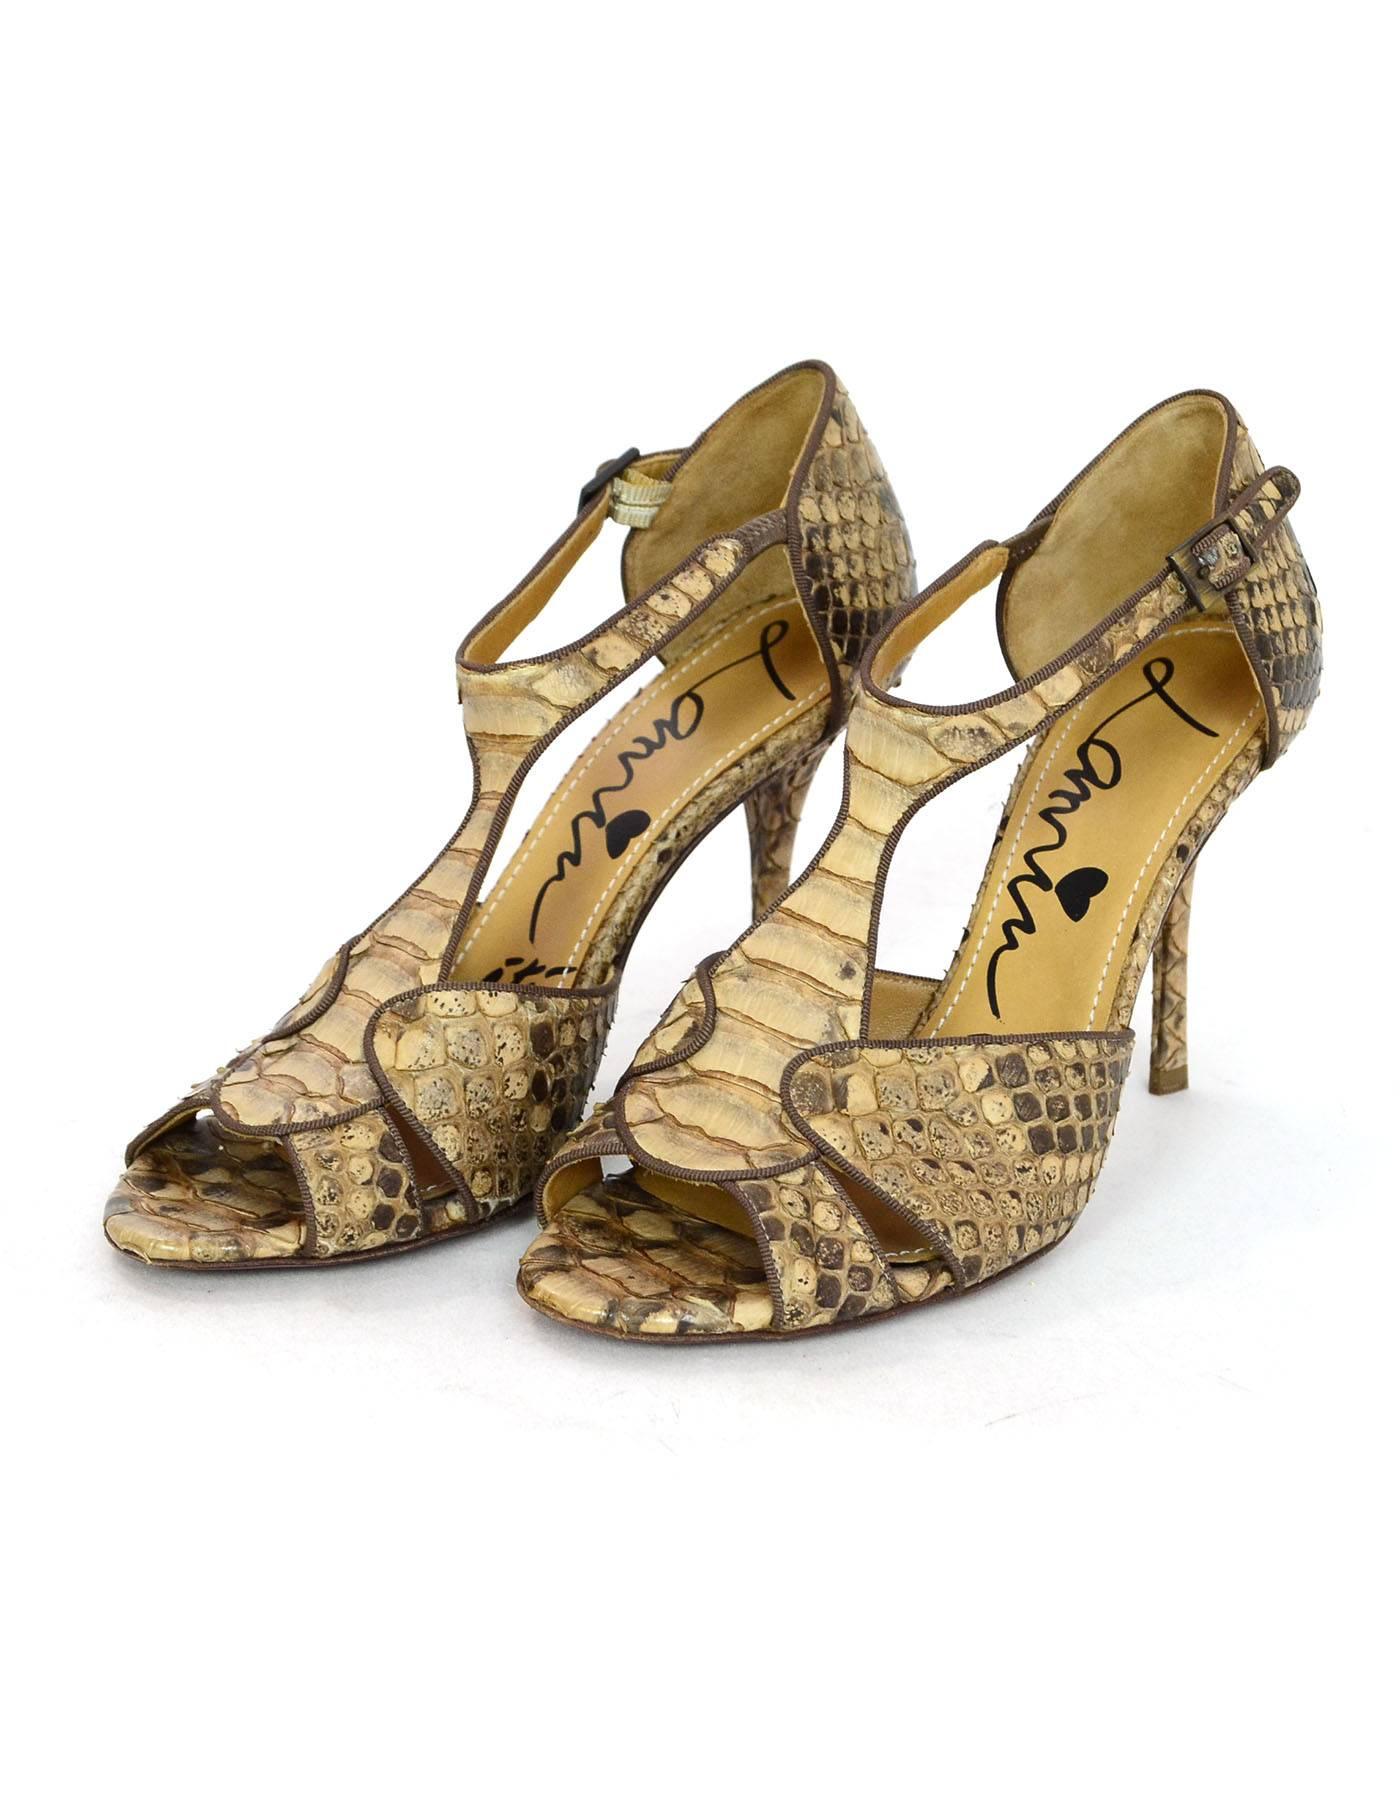 Lanvin Tan Python T-Strap Sandals Sz 38

Made In: Italy
Color: Tan
Materials: Python
Closure/Opening: Buckle closure at ankle
Sole Stamp: Vero cuoio made in italy 38
Overall Condition: Excellent pre-owned, some wear at outsoles
Marked Size: 38
Heel